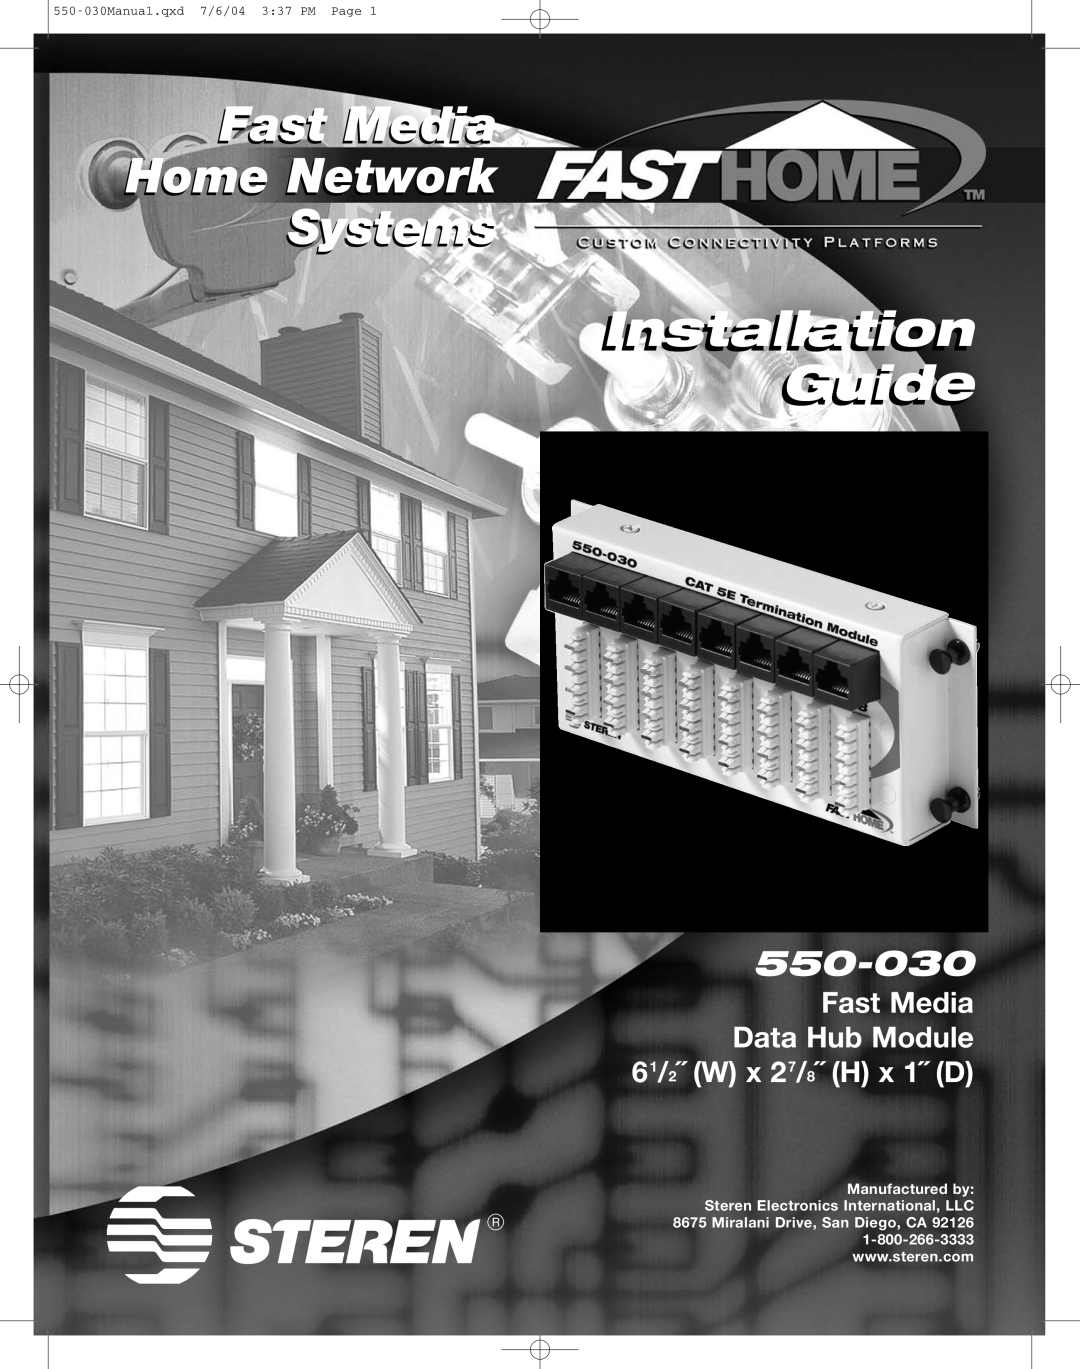 Steren manual Fast Media Home Network Systems, Installationll Guidei, 550-030Manual.qxd 7/6/04 337 PM Page 